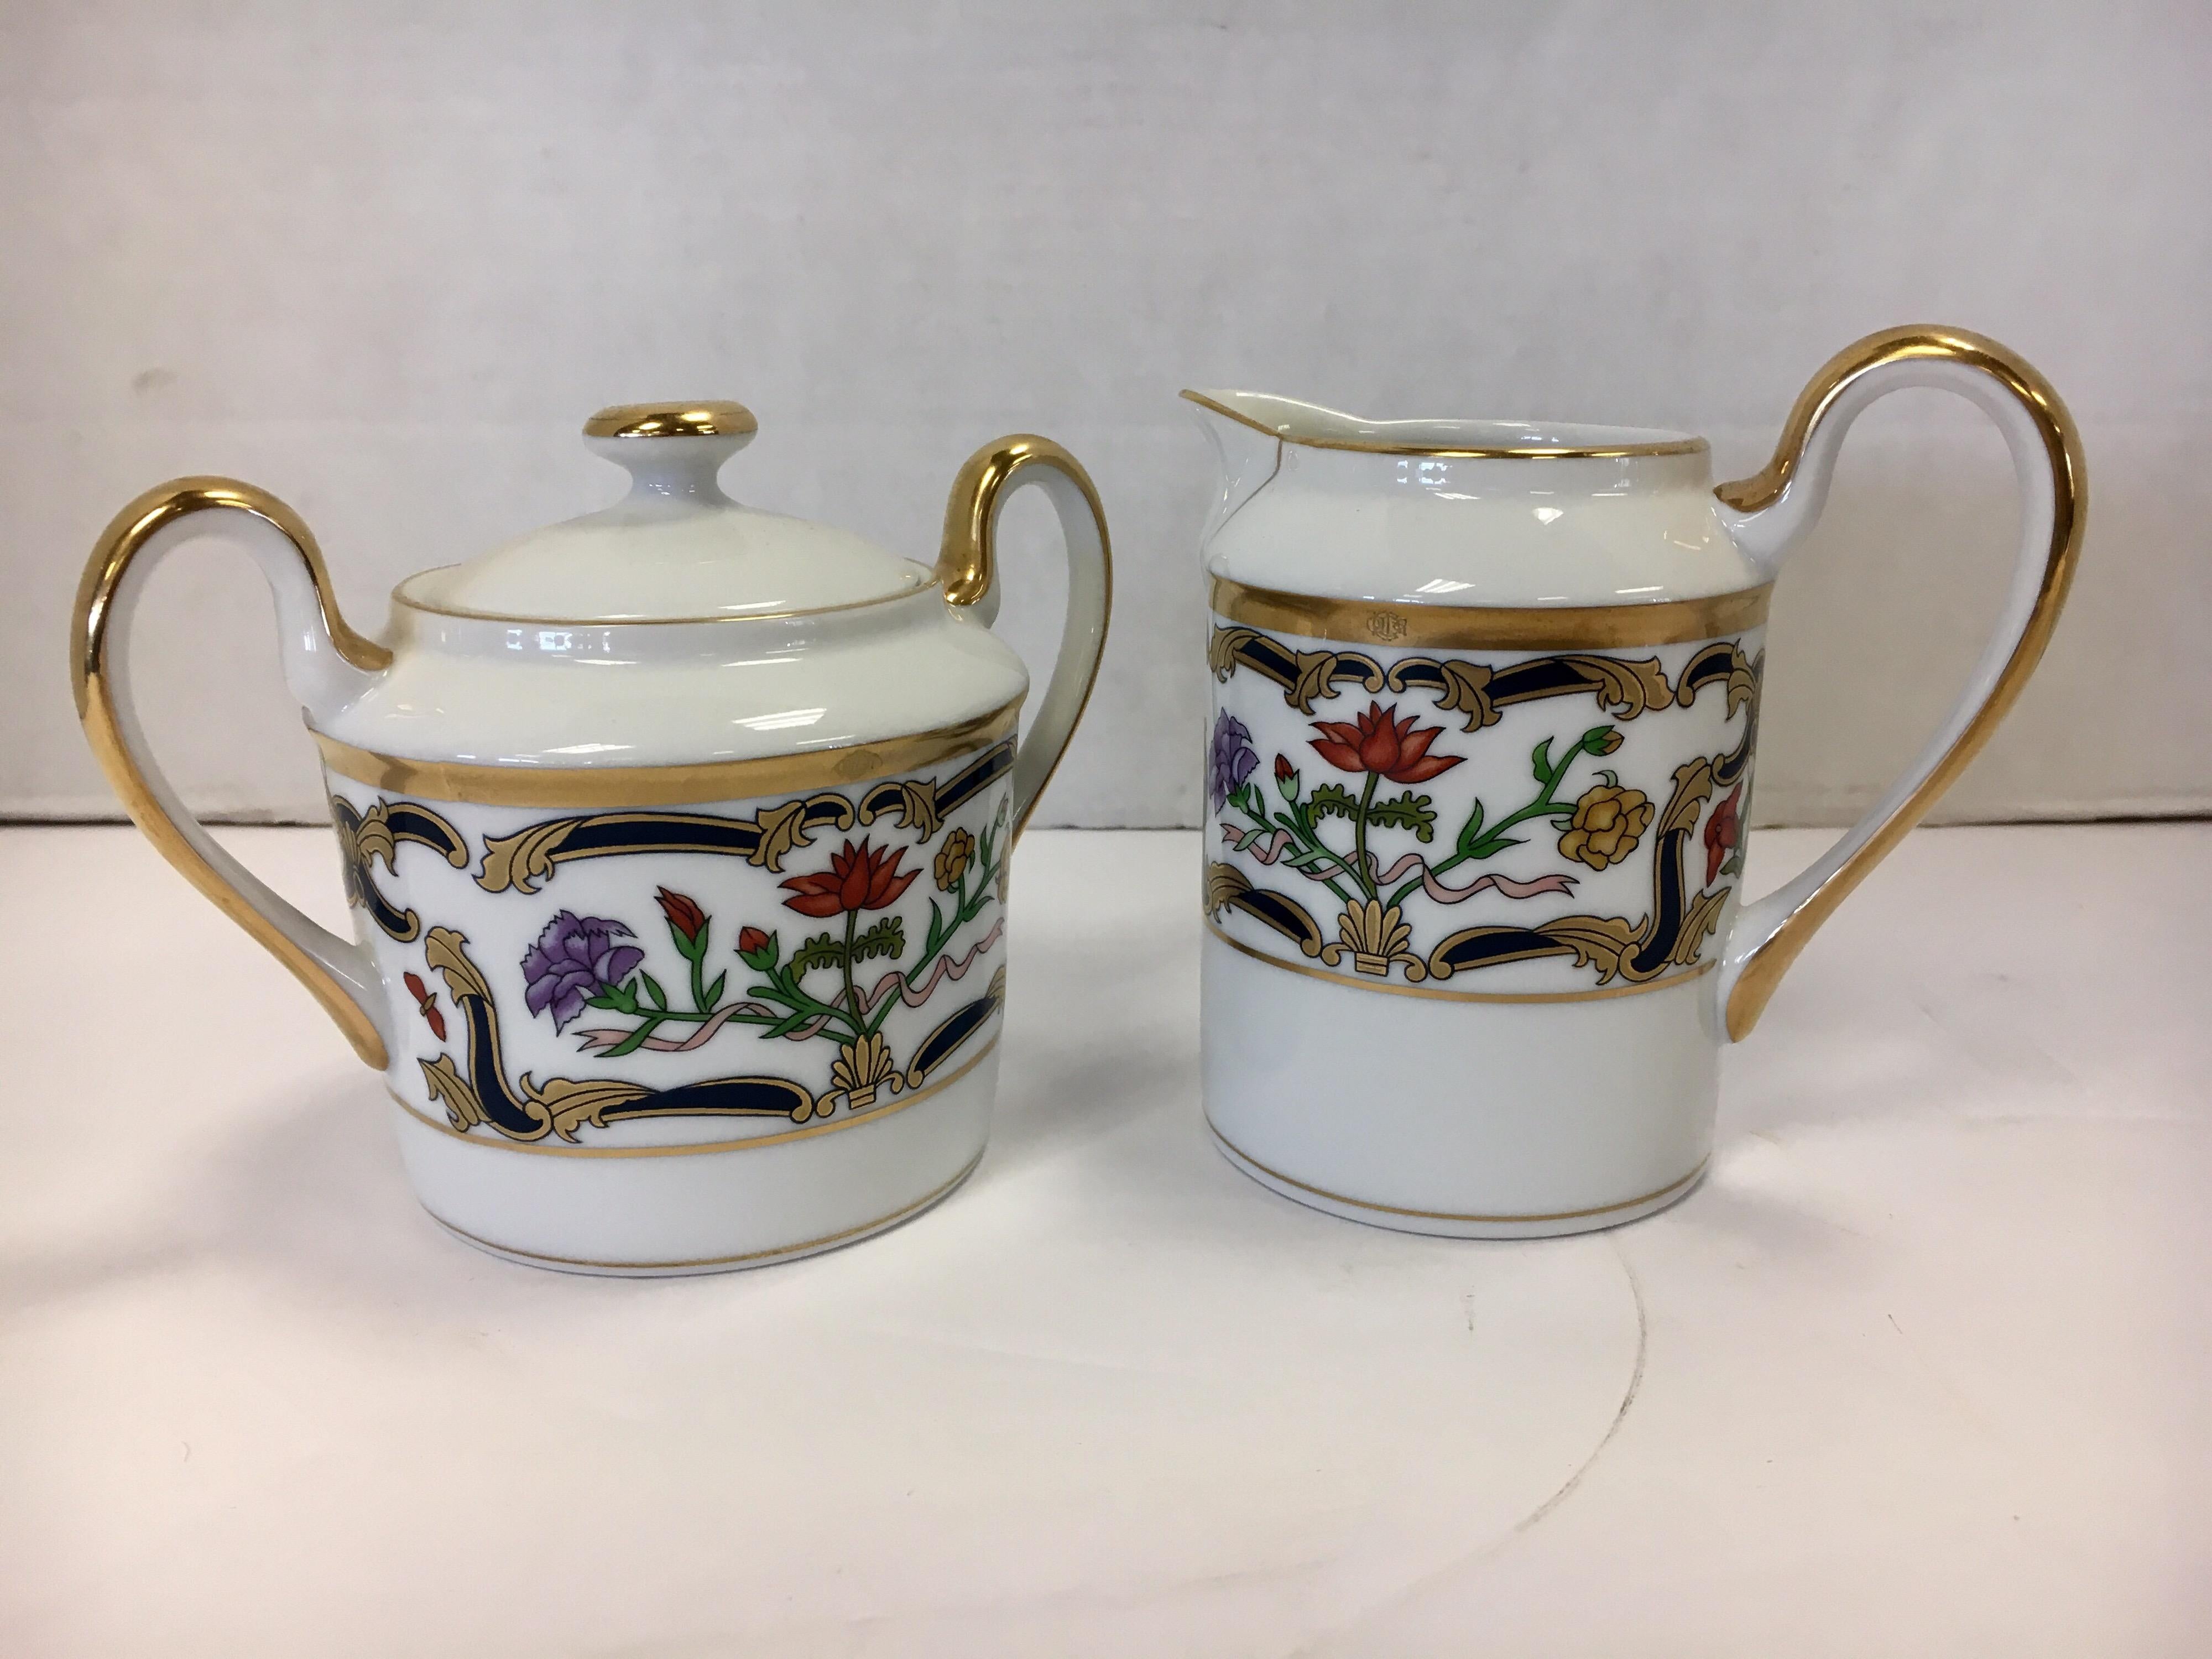 Rare, 1990s Christian Dior Renaissance two-piece set which includes both the sugar and creamer for this
coveted china service.